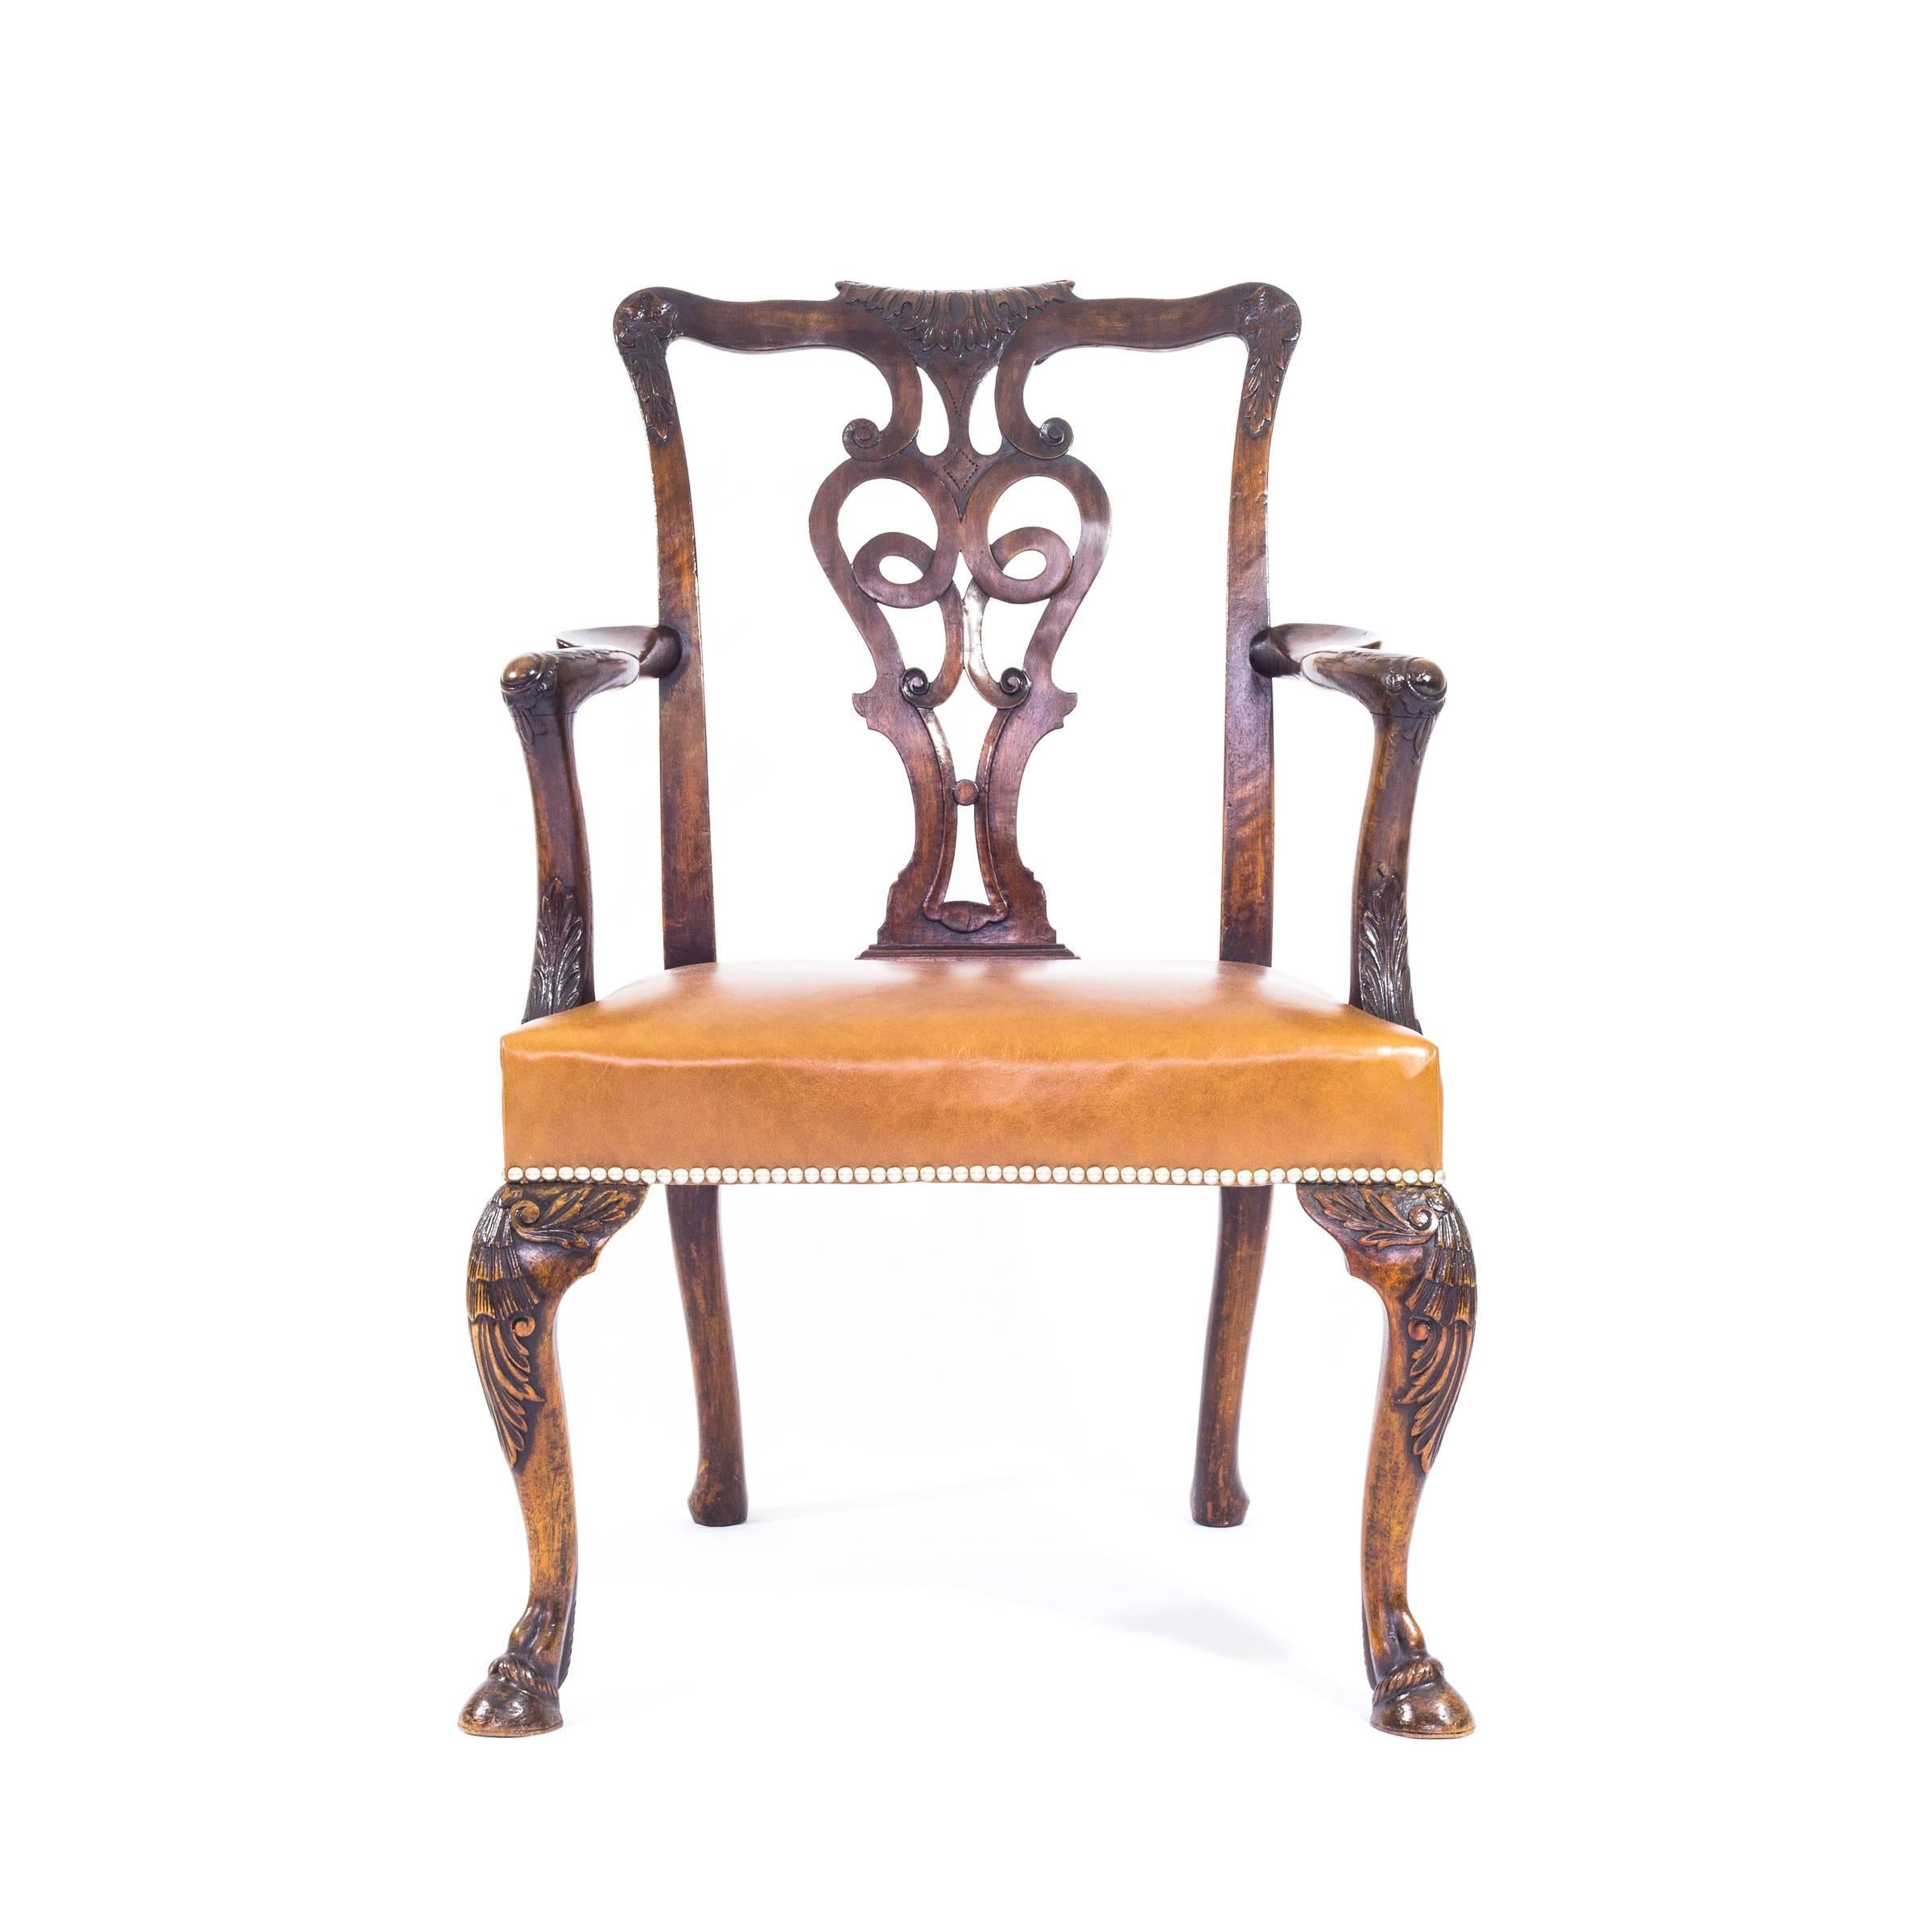 Unlike the majority of mass-produced Georgian revival chairs, this bespoke armchair was commissioned by Lord Rufus Daniel Isaacs, the Viceroy of India in 1921-1926. Copied to match the original mid-18th century Irish chairs, this exceptional